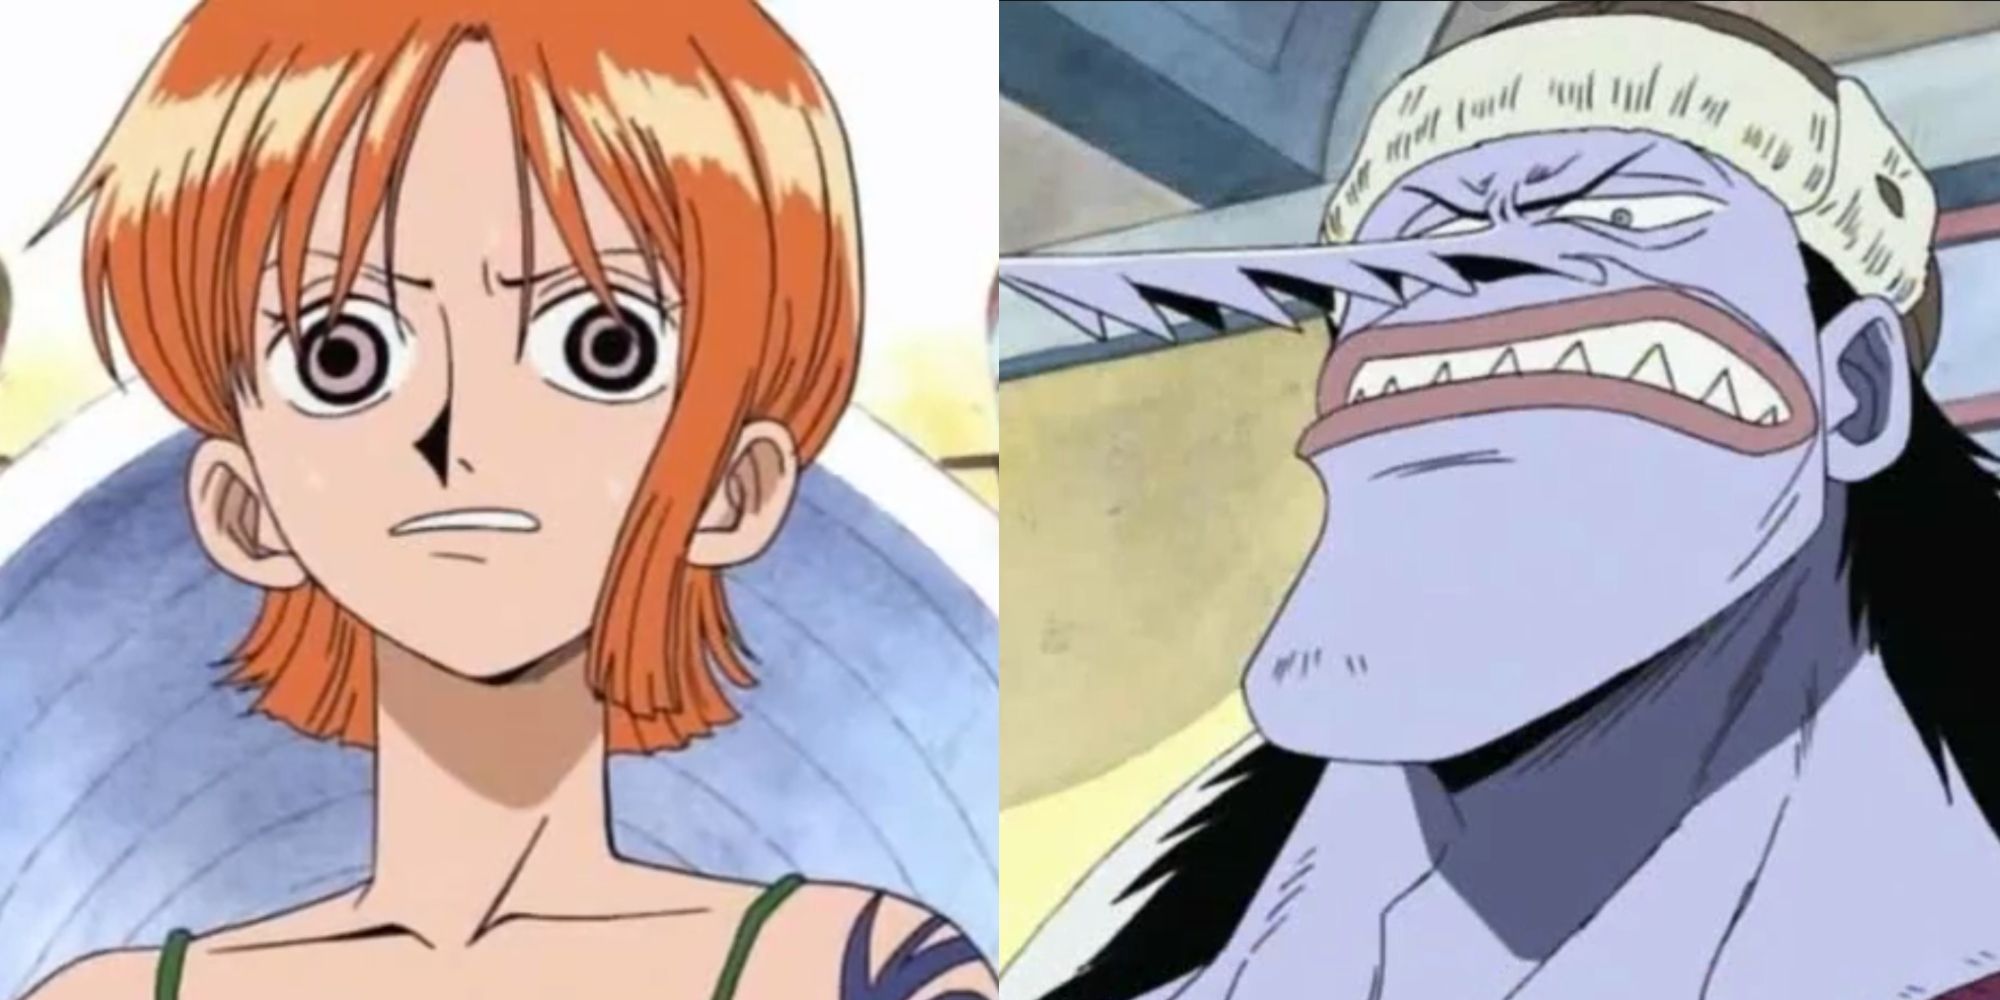 One Piece Nami Looking Terrified and Arlong Looking Mad